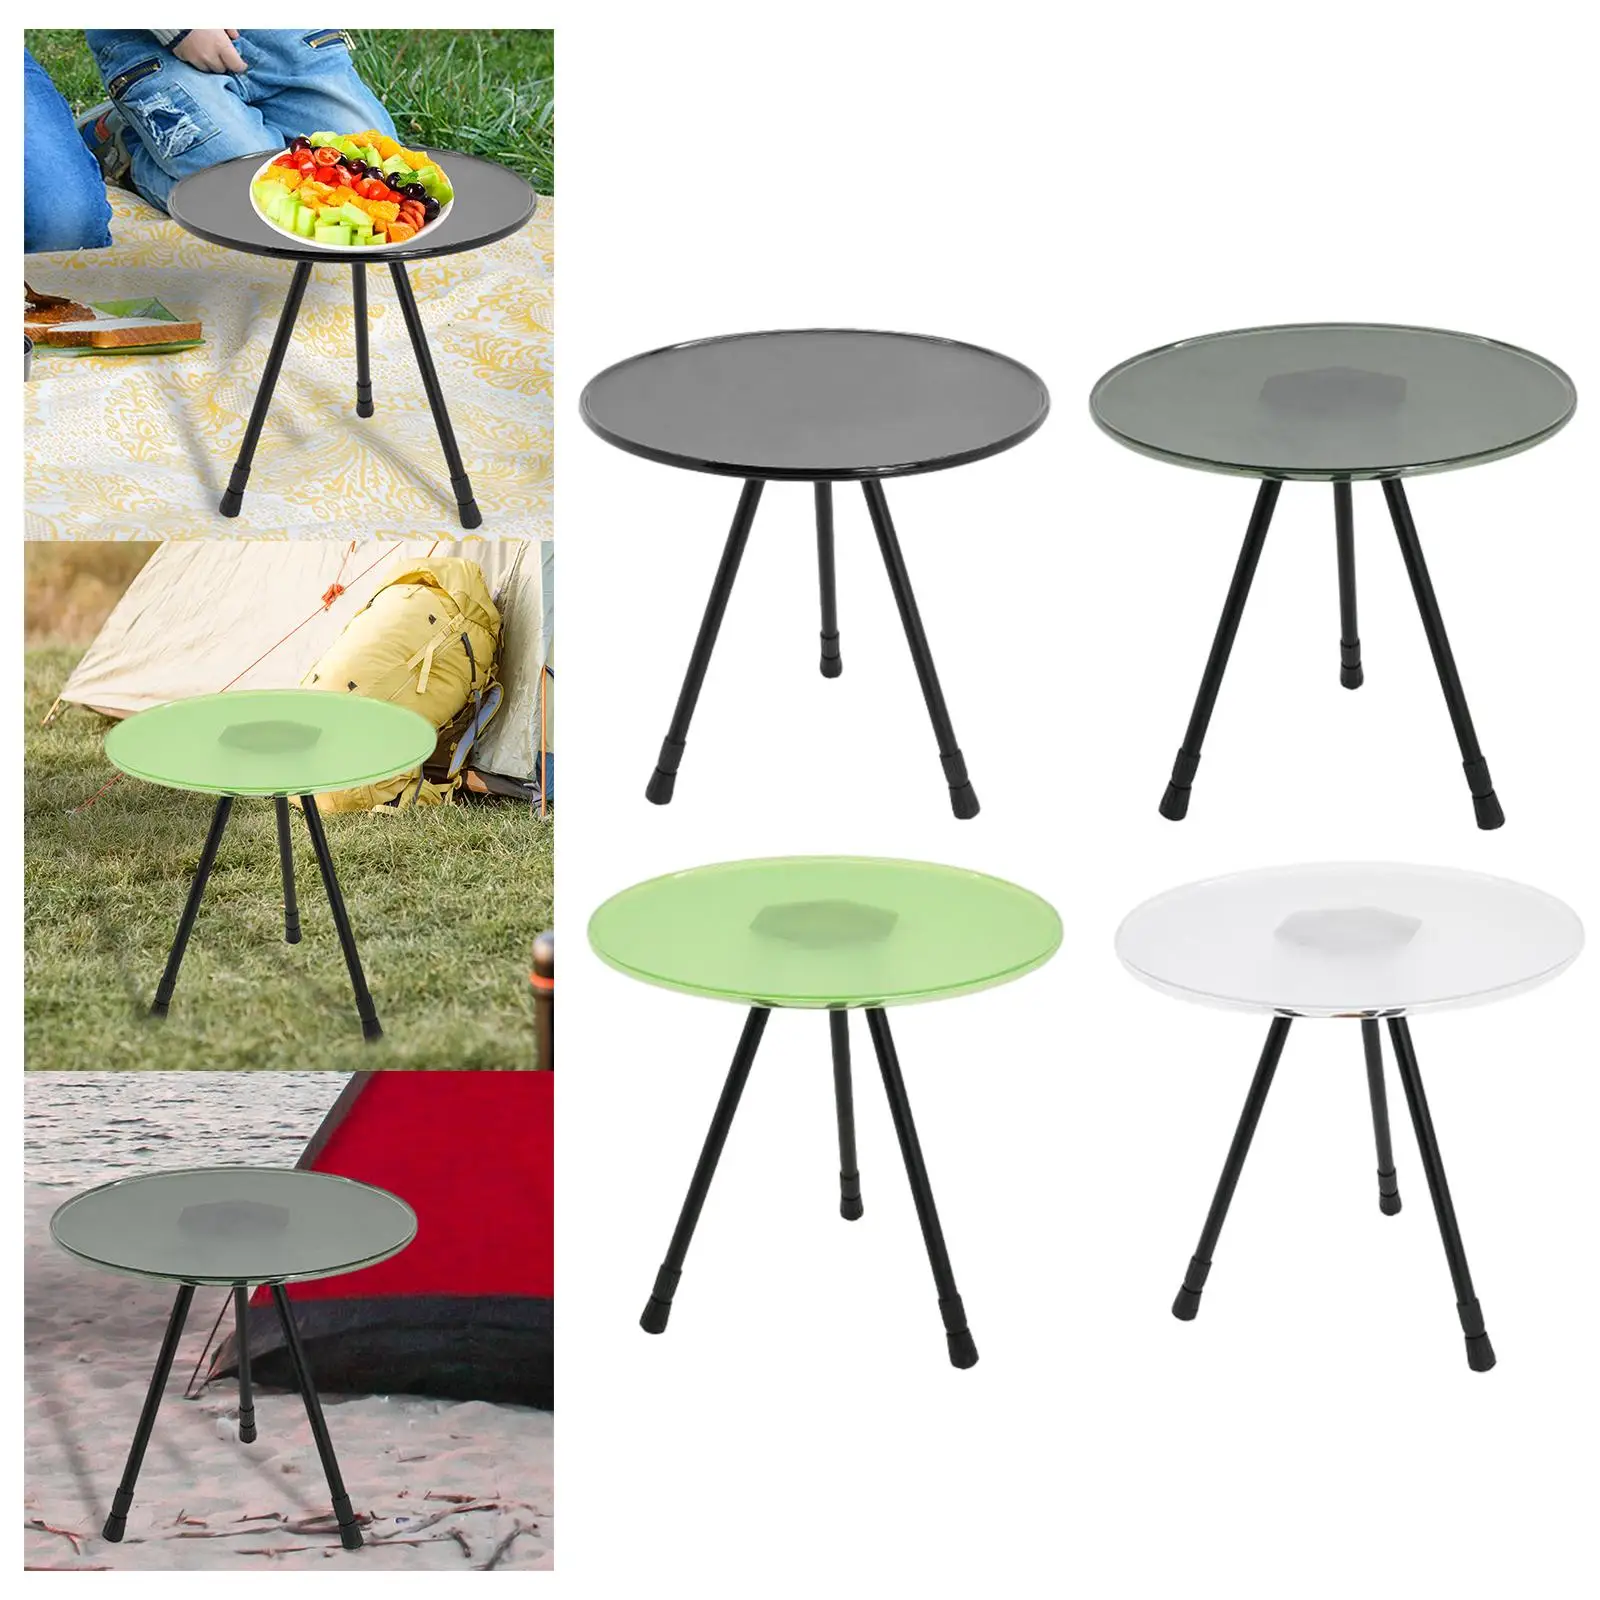 Three Legged Triangular Round Table Collapsible Multifunctional Stable Retractable Lift Dining Desk for Picnic Kitchen Barbecue